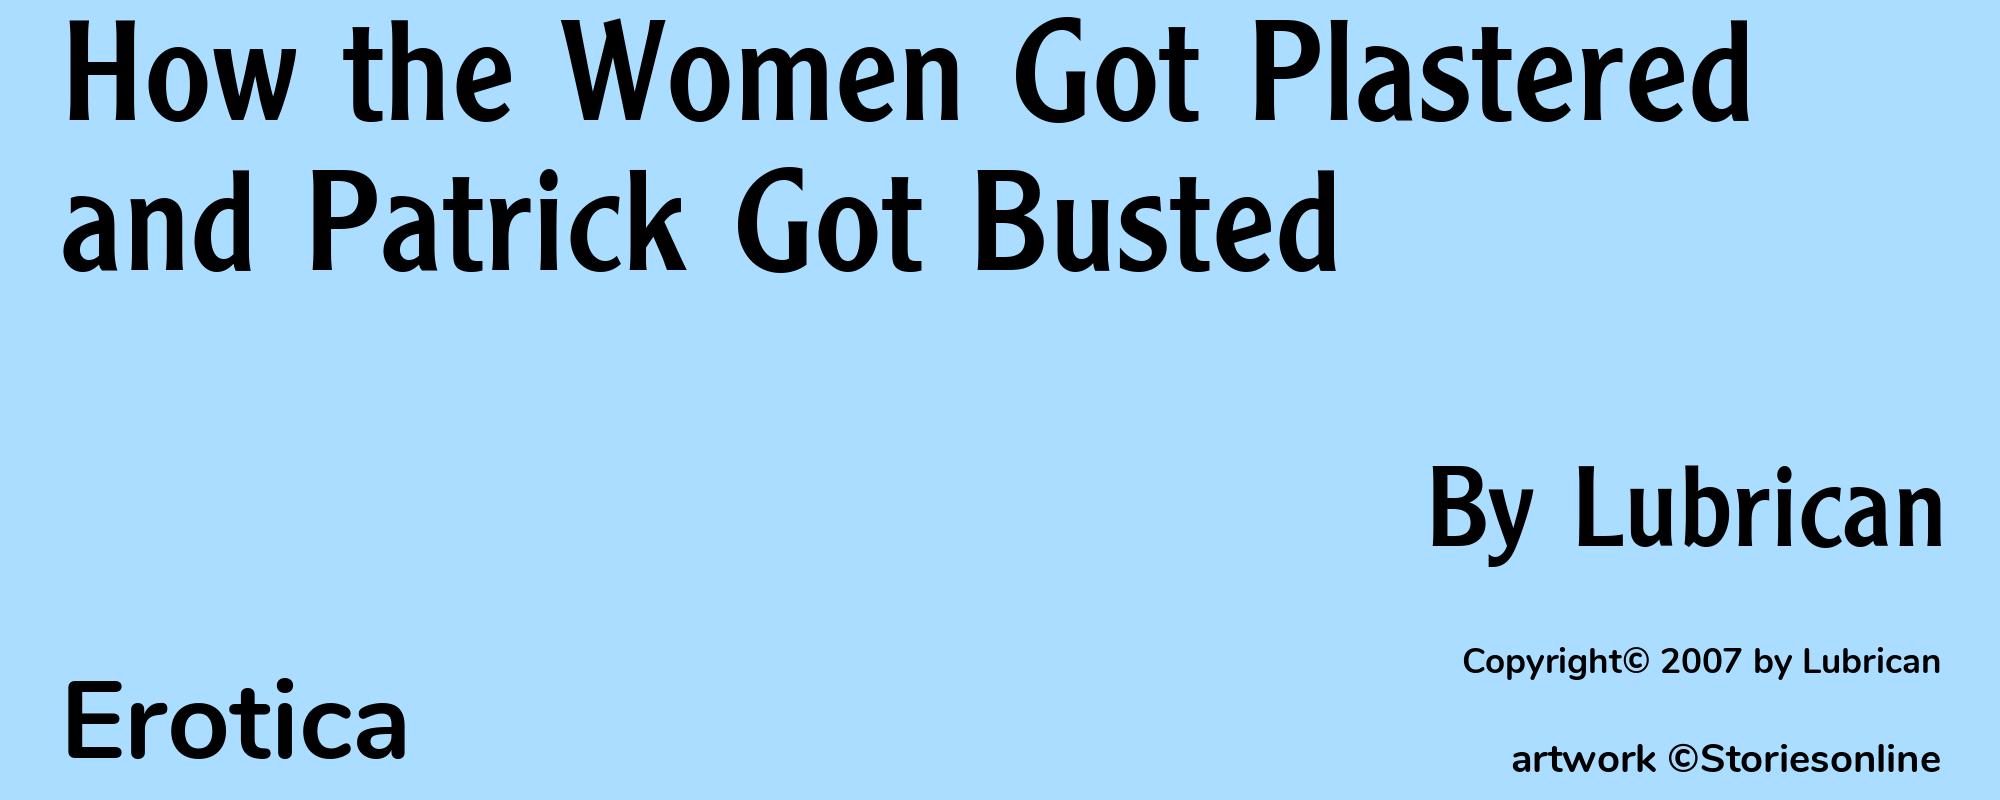 How the Women Got Plastered and Patrick Got Busted - Cover